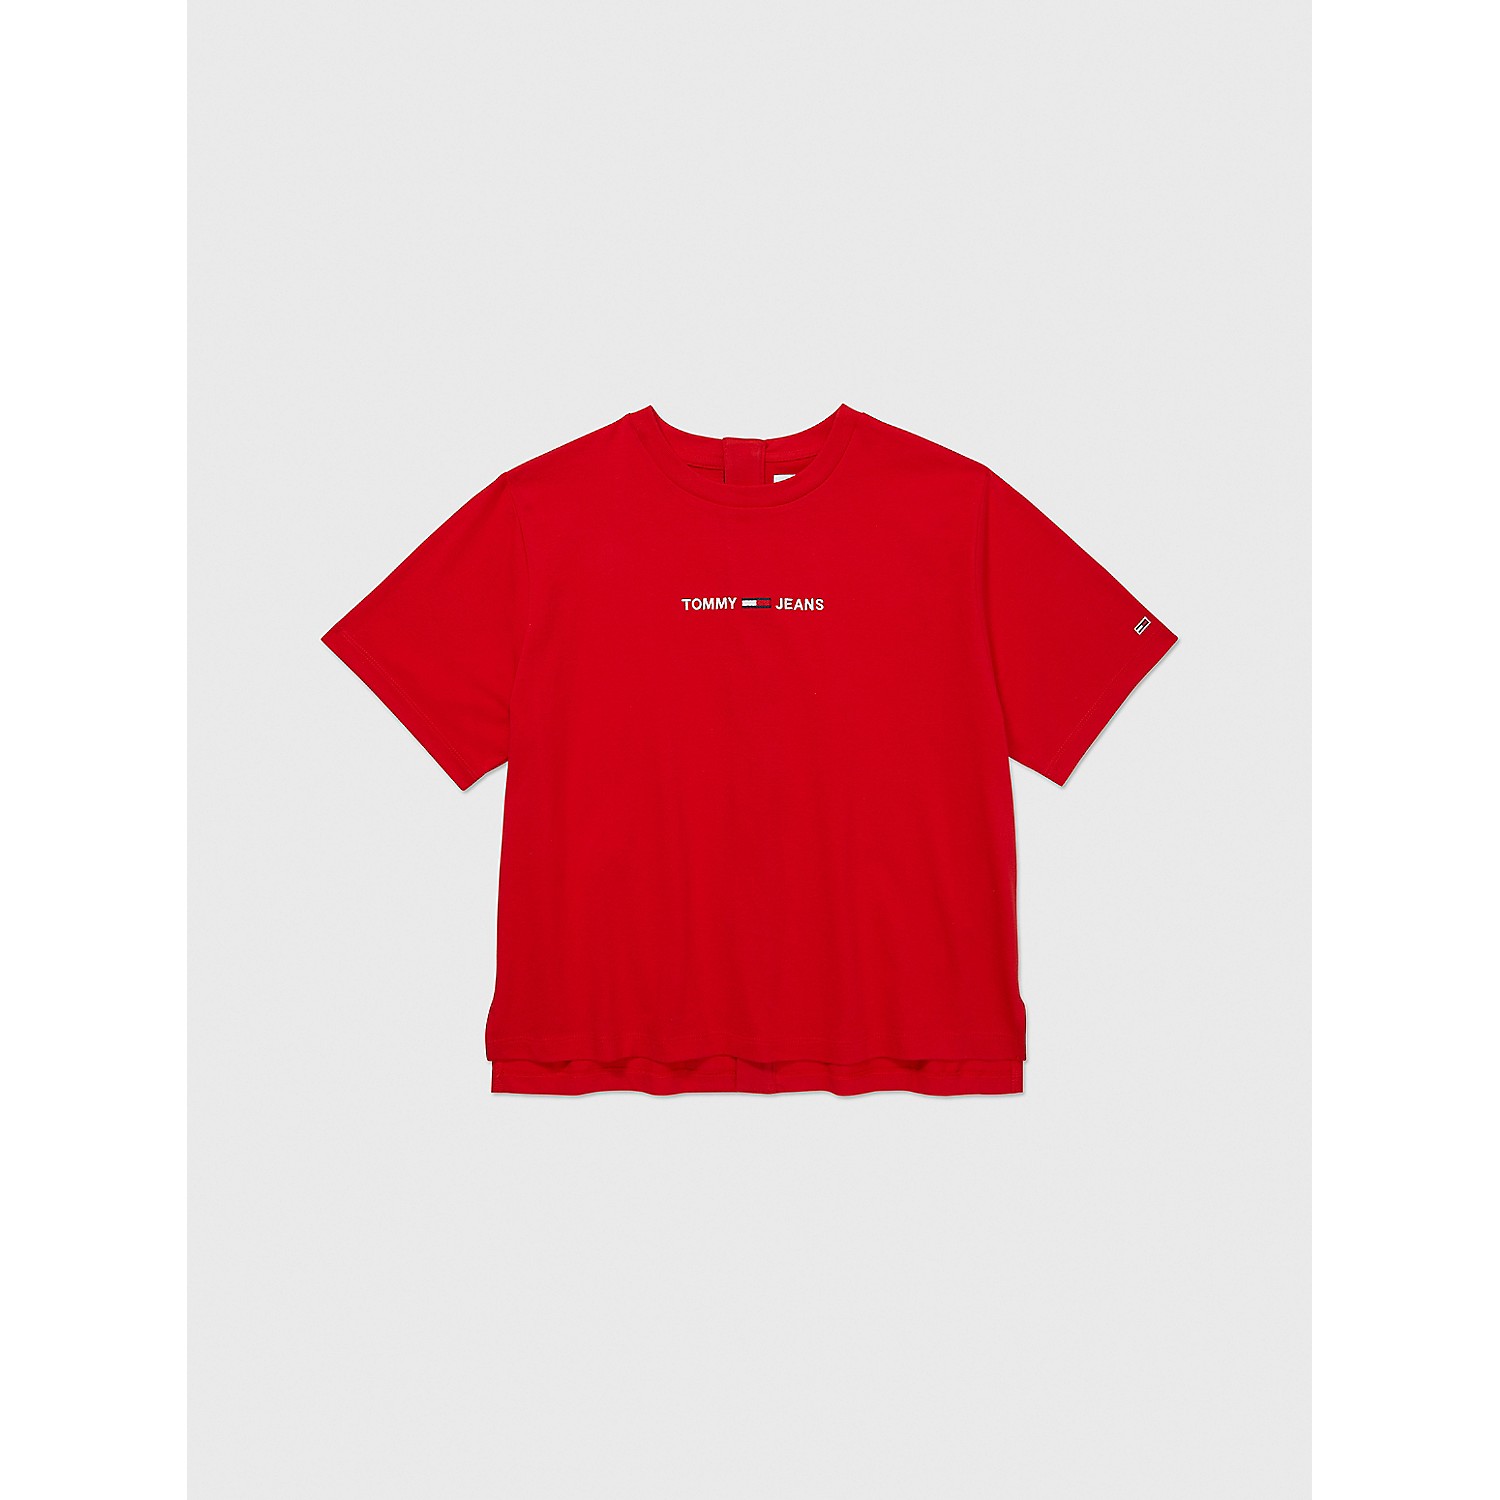 TOMMY HILFIGER Seated Fit Logo T-Shirt